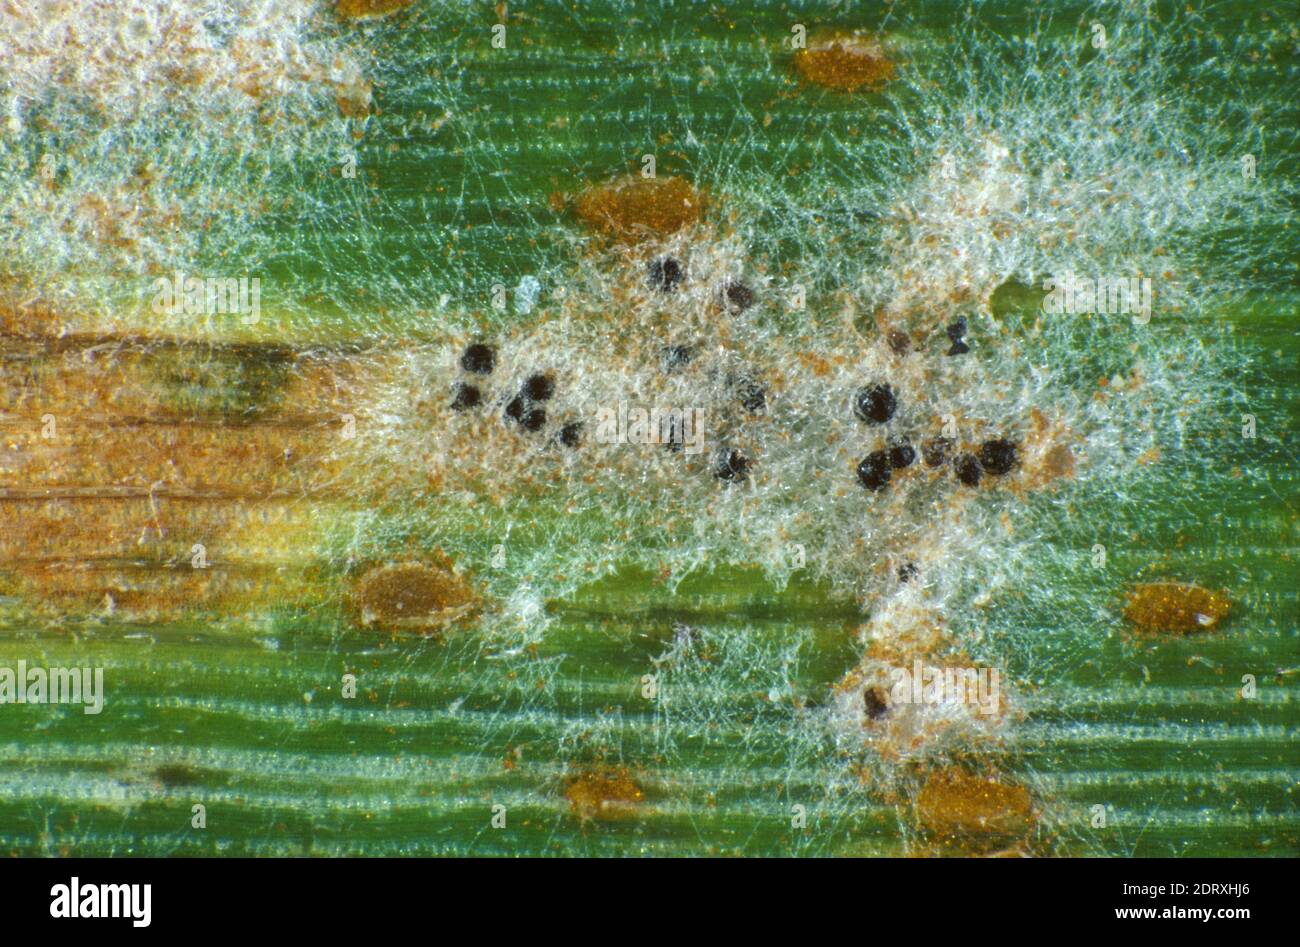 Powdery mildew (Erysiphe graminis) mycelium and cleistothecia and brown leaf rust (Puccinia triticina) pustules on a wheat leaf Stock Photo